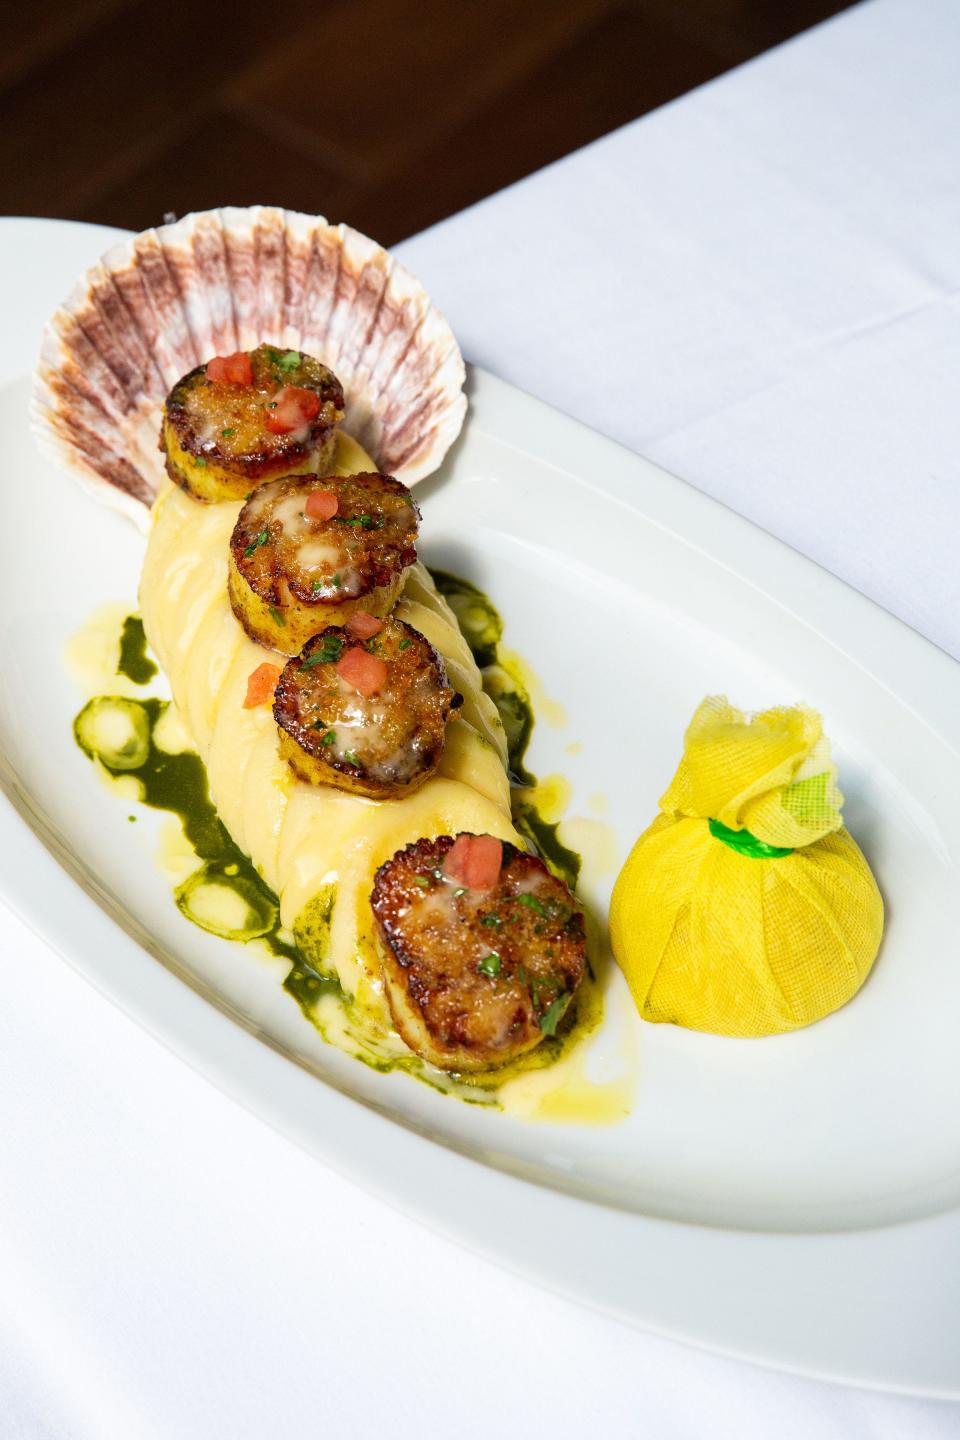 Scallops at Joe Muer Seafood, which opened in Nashville's Capitol View area on Aug. 23, 2023. It's the third location for the longtime fine-dining seafood restaurant from Detroit and the first outside the Detroit area.